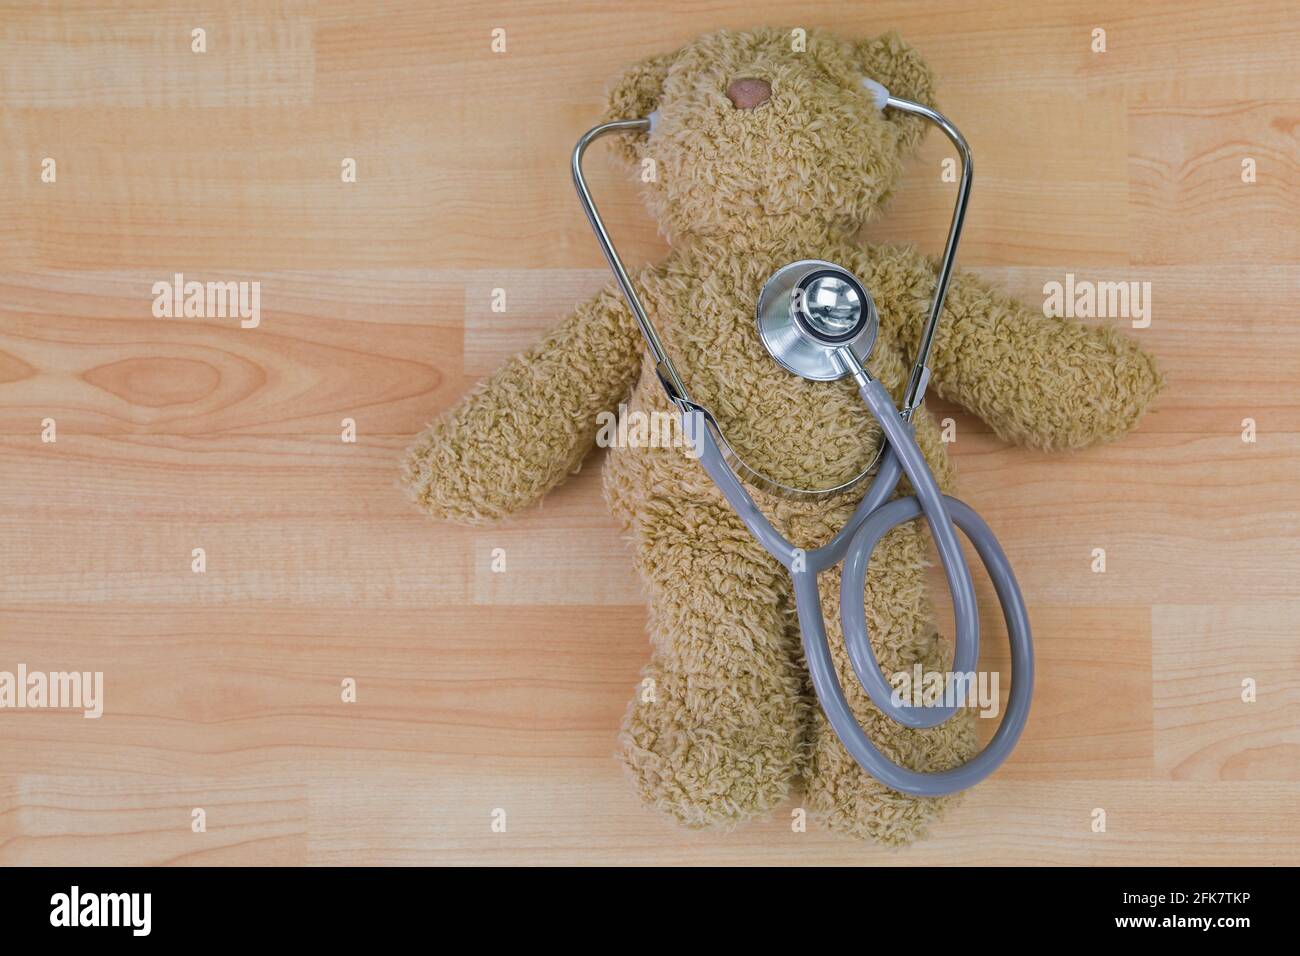 Teddy bear on wooden floor with stethoscope, acoustic medical device with earpieces in ears Stock Photo